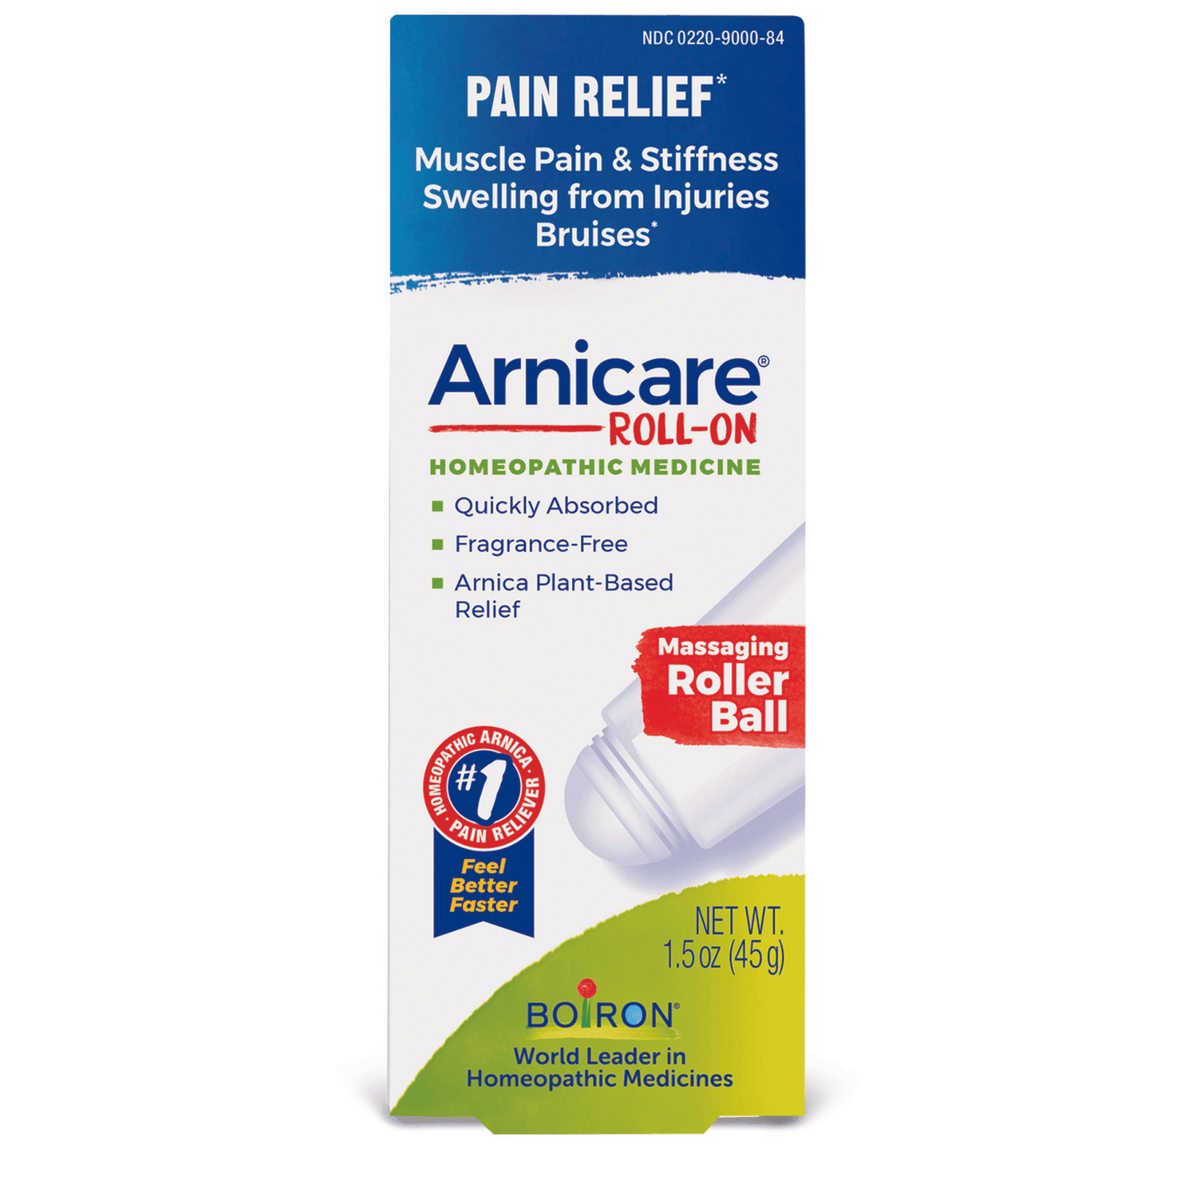 Primary Image of Arnicare Roll-On